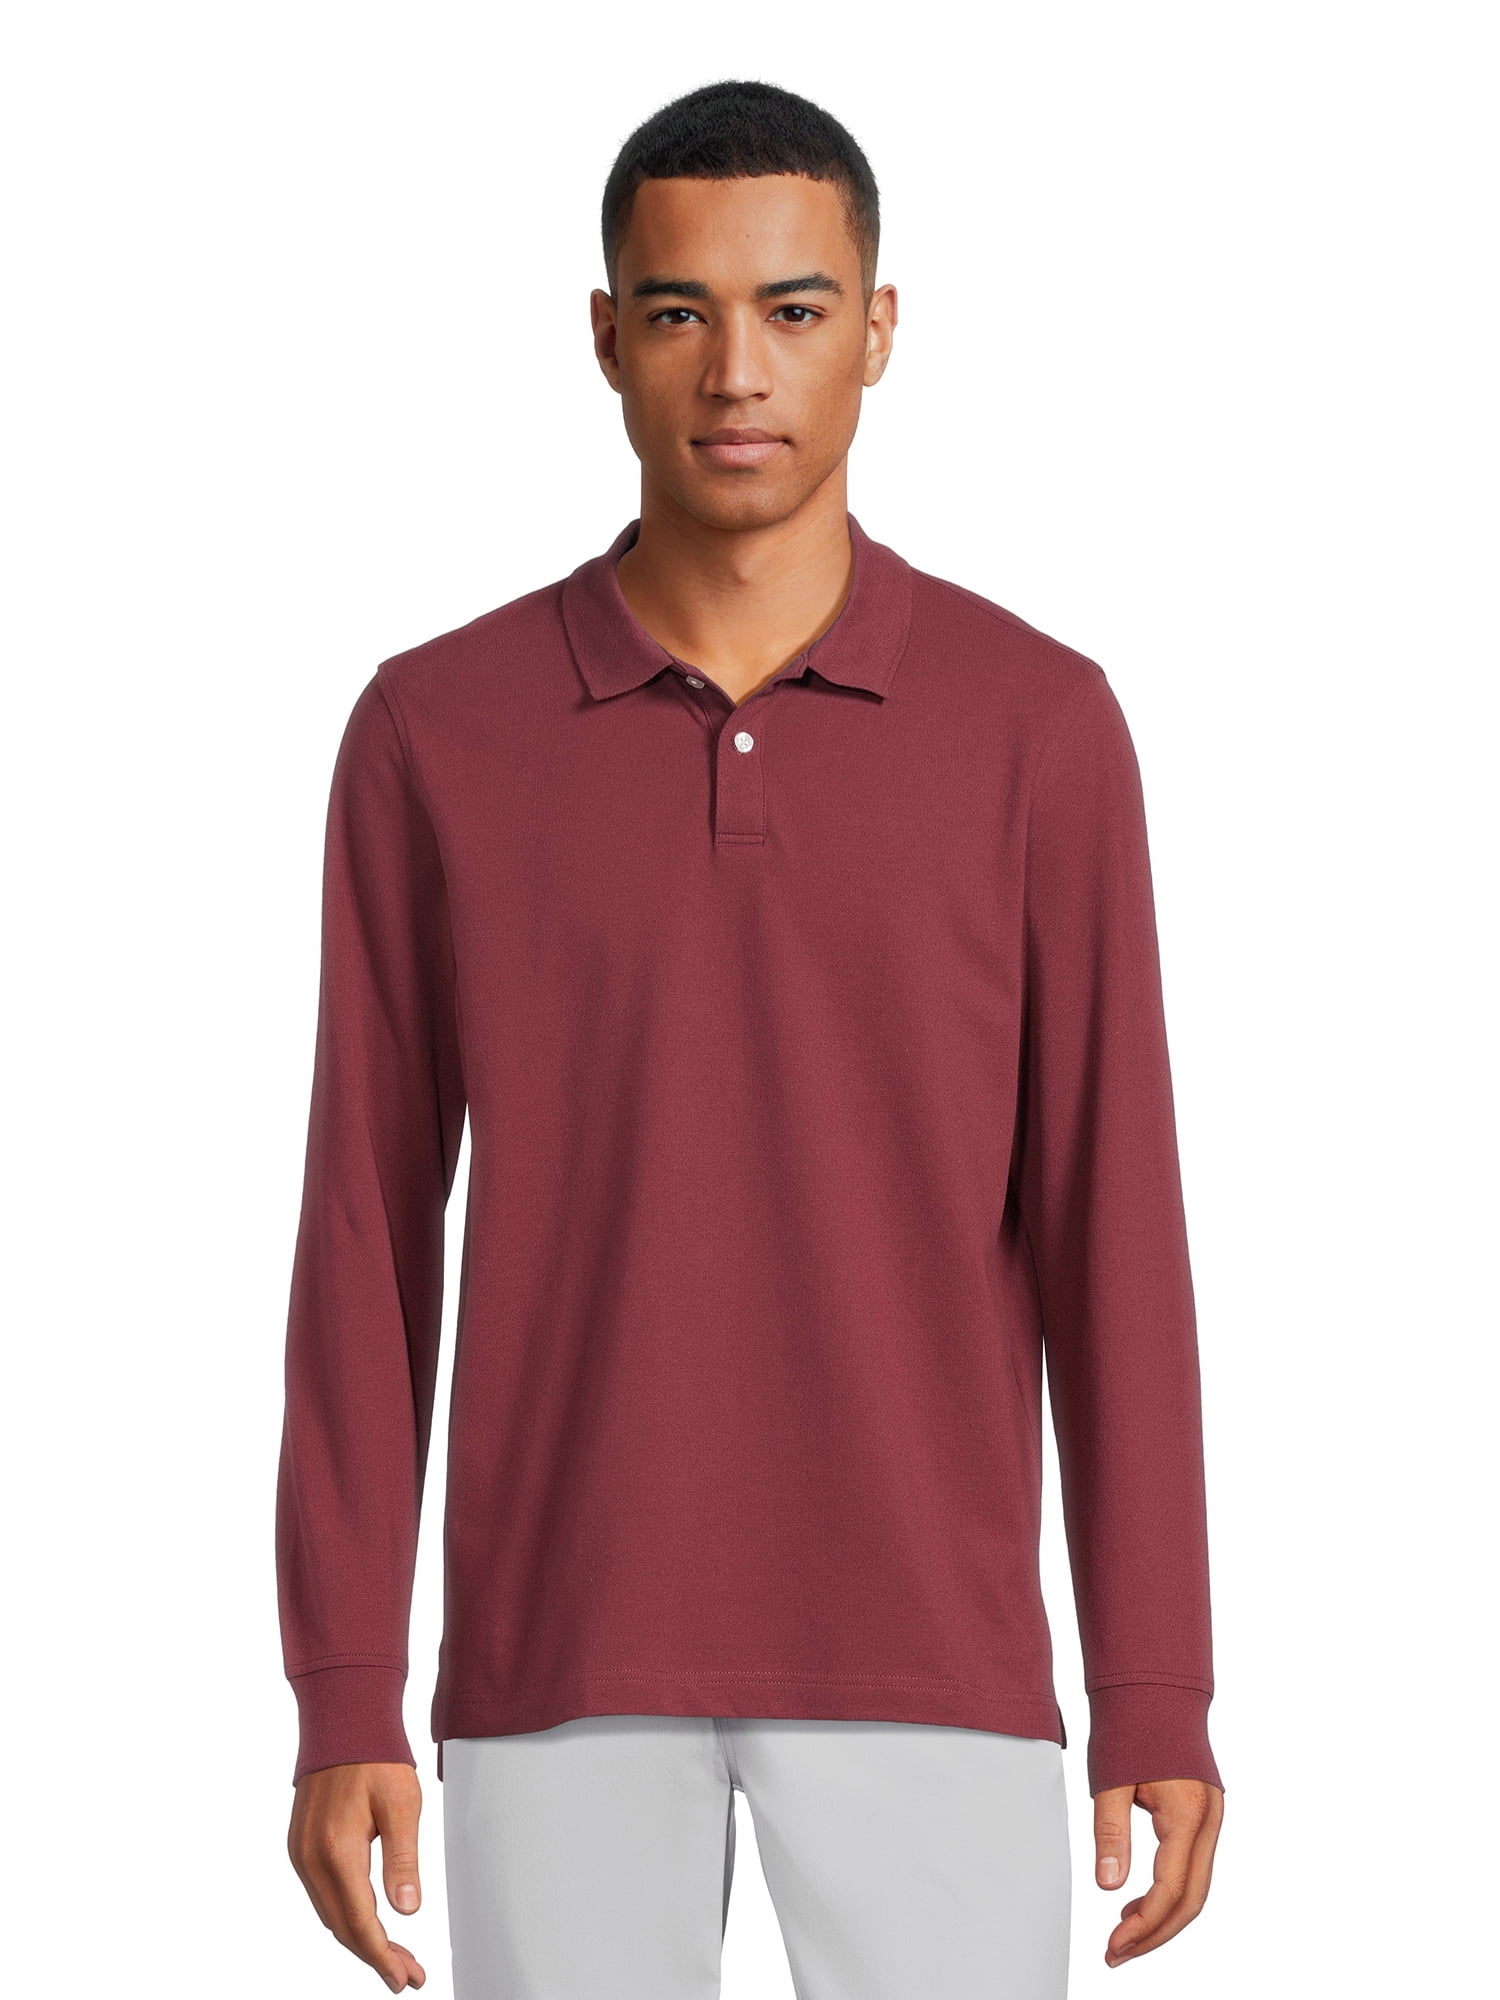 George Men's Pique Polo Shirt with Long Sleeves, Sizes S-3XL - Walmart.com